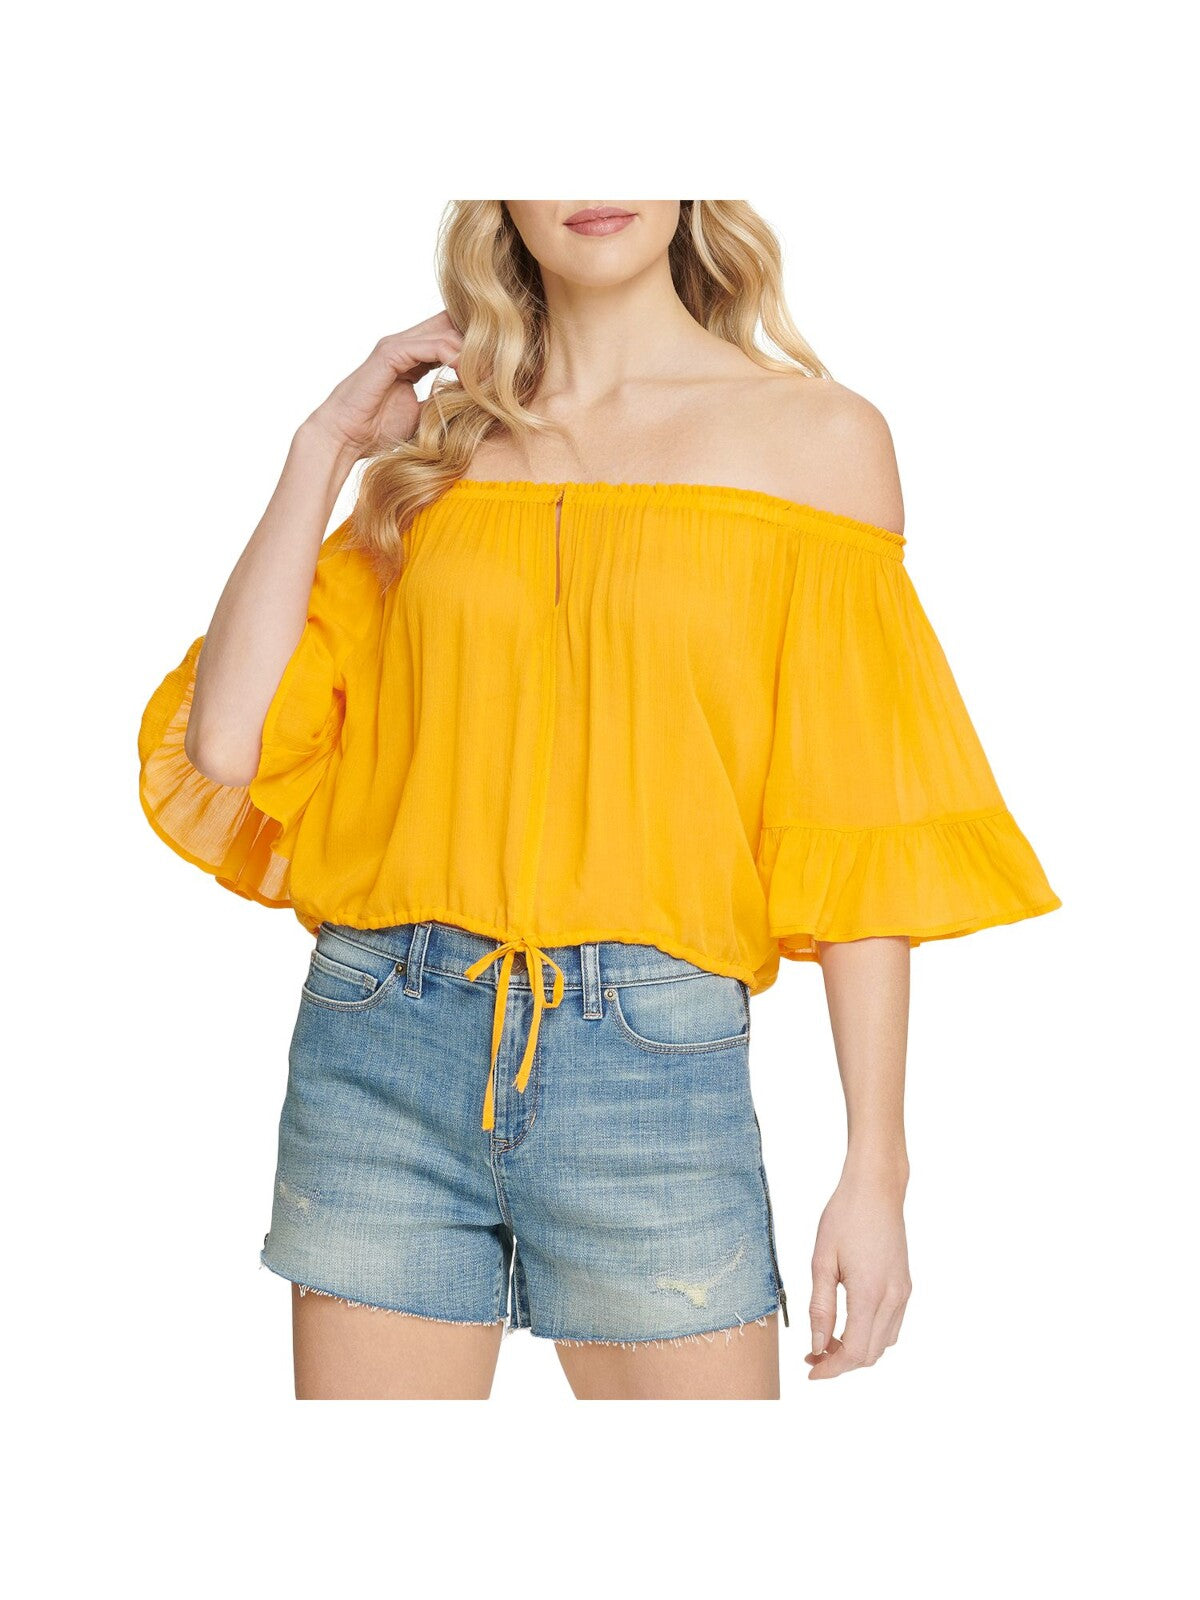 DKNY JEANS Womens Gold Tie Off Shoulder Top XL